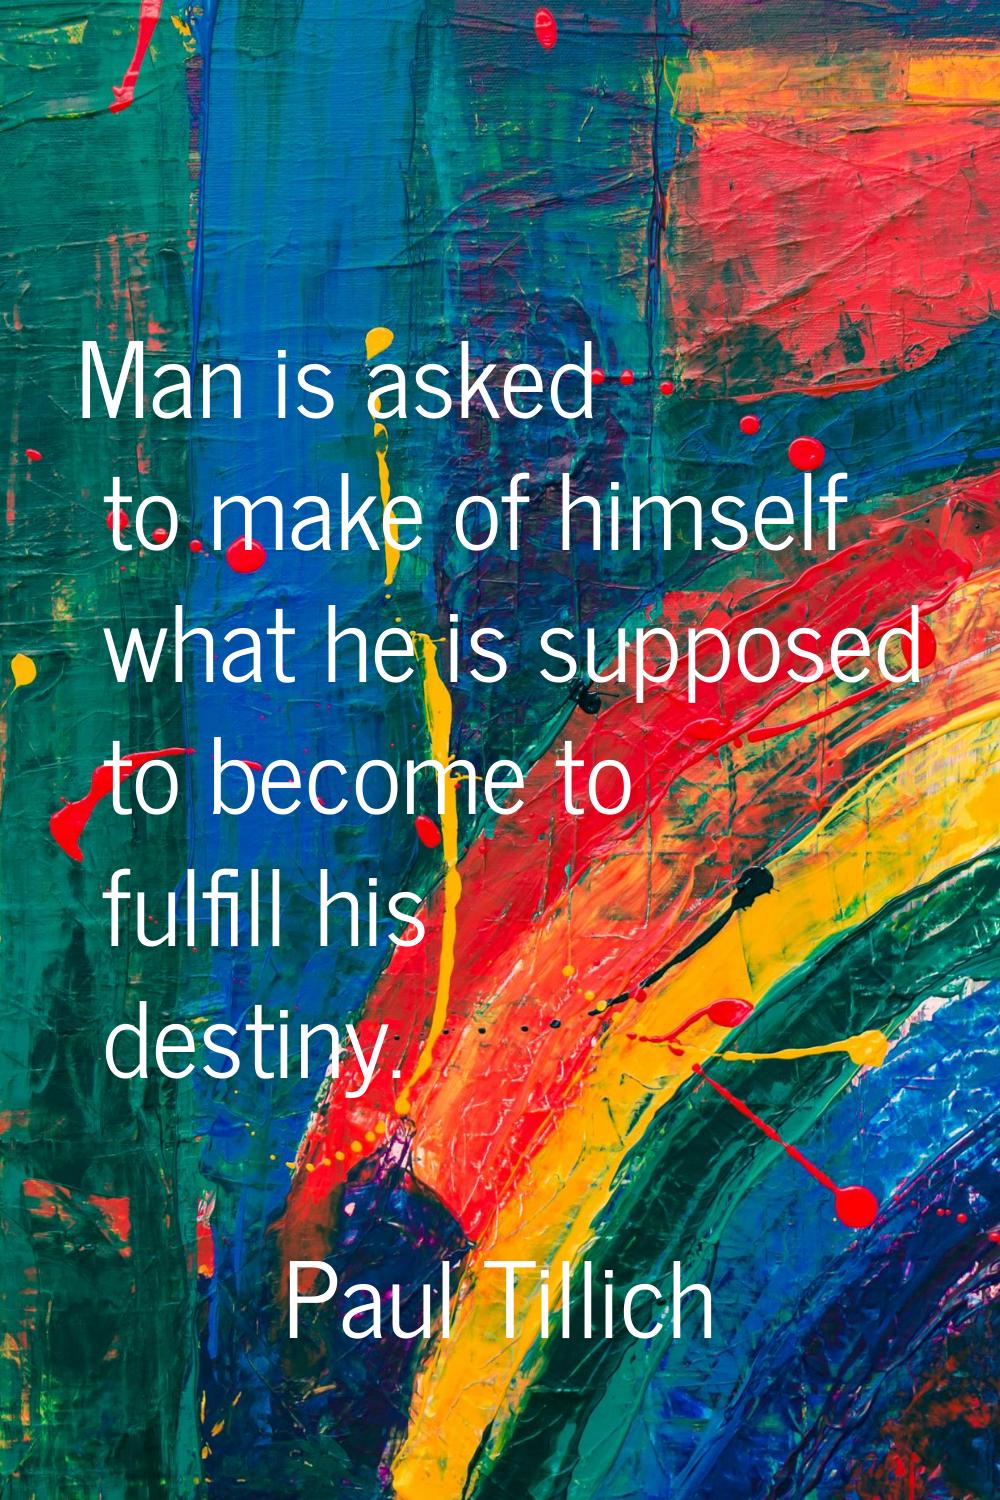 Man is asked to make of himself what he is supposed to become to fulfill his destiny.